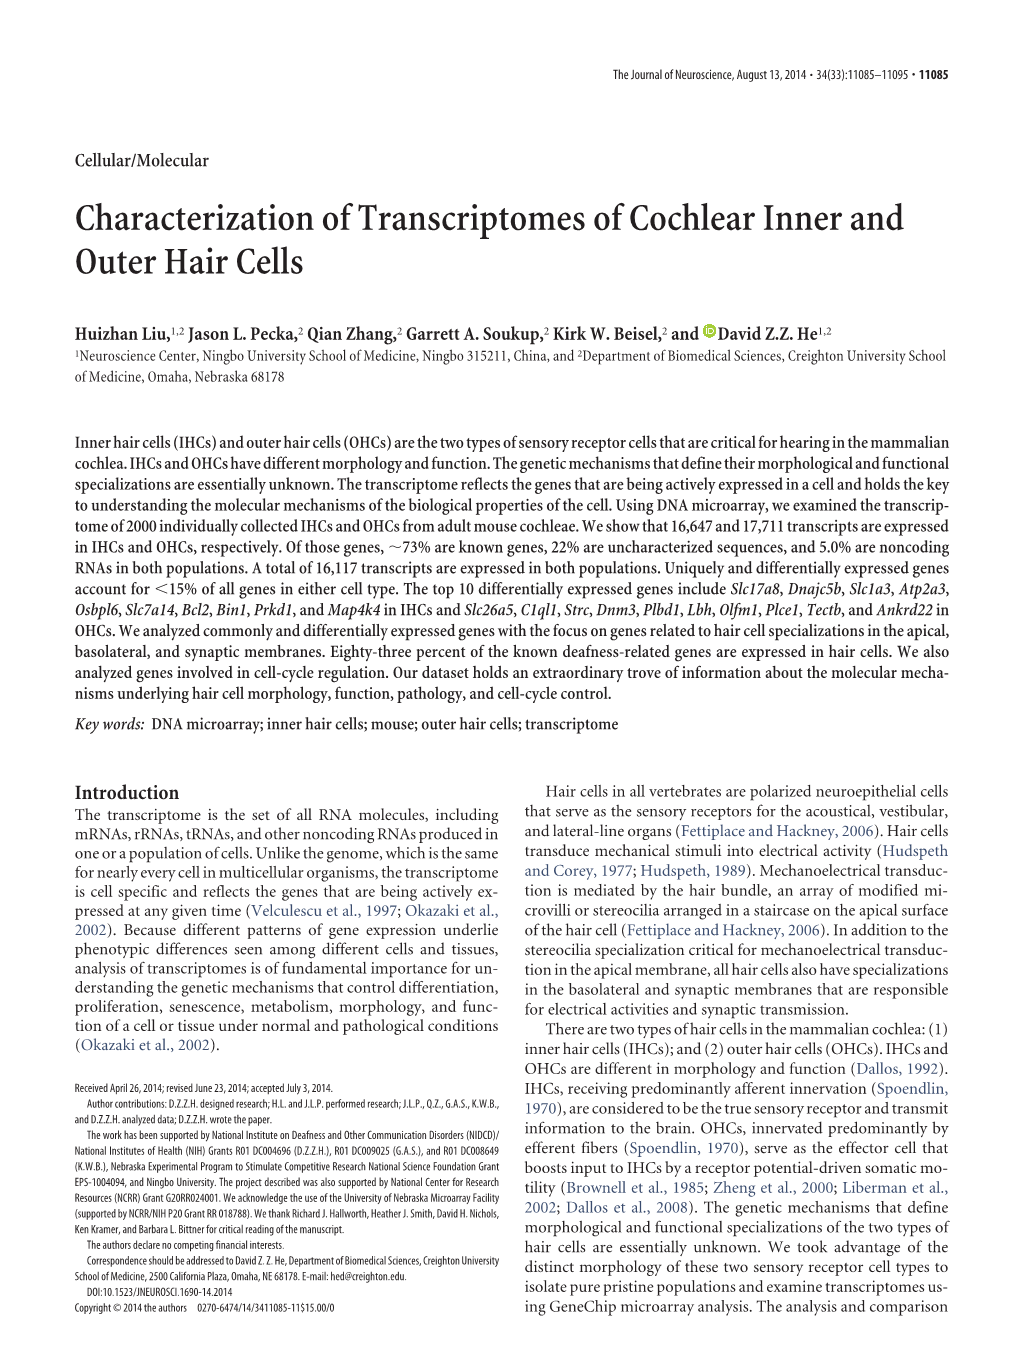 Characterization of Transcriptomes of Cochlear Inner and Outer Hair Cells